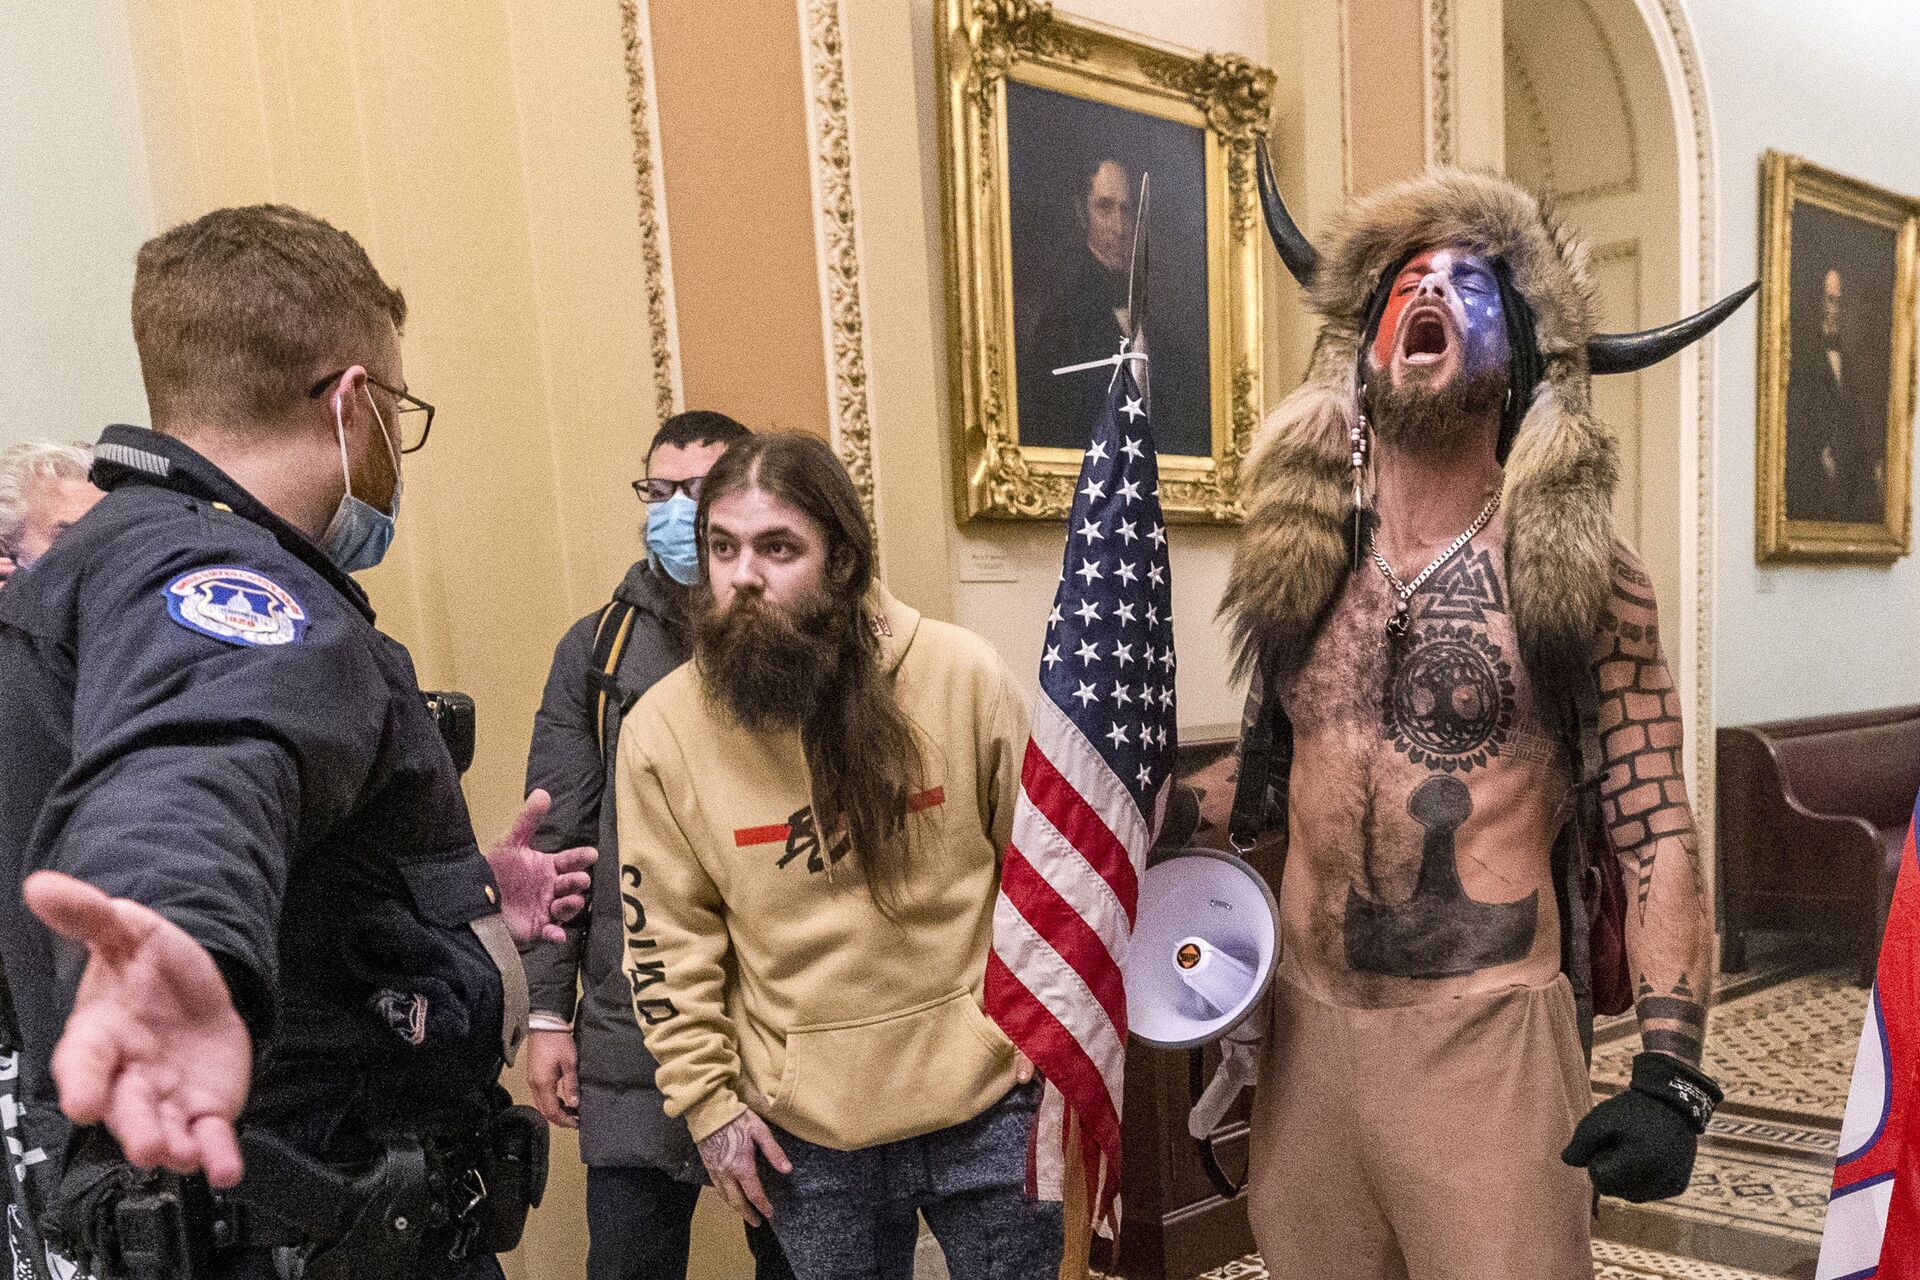 FILE - In this Wednesday, Jan. 6, 2021 file photo, supporters of President Donald Trump, including Jacob Chansley, right with fur hat, are confronted by U.S. Capitol Police officers outside the Senate Chamber inside the Capitol in Washington. Congress is set to hear from former security officials about what went wrong at the U.S. Capitol on Jan. 6. That's when when a violent mob laid siege to the Capitol and interrupted the counting of electoral votes. Three of the four testifying Tuesday resigned under pressure immediately after the attack, including the former head of the Capitol Police.  - Sputnik International, 1920, 18.09.2021